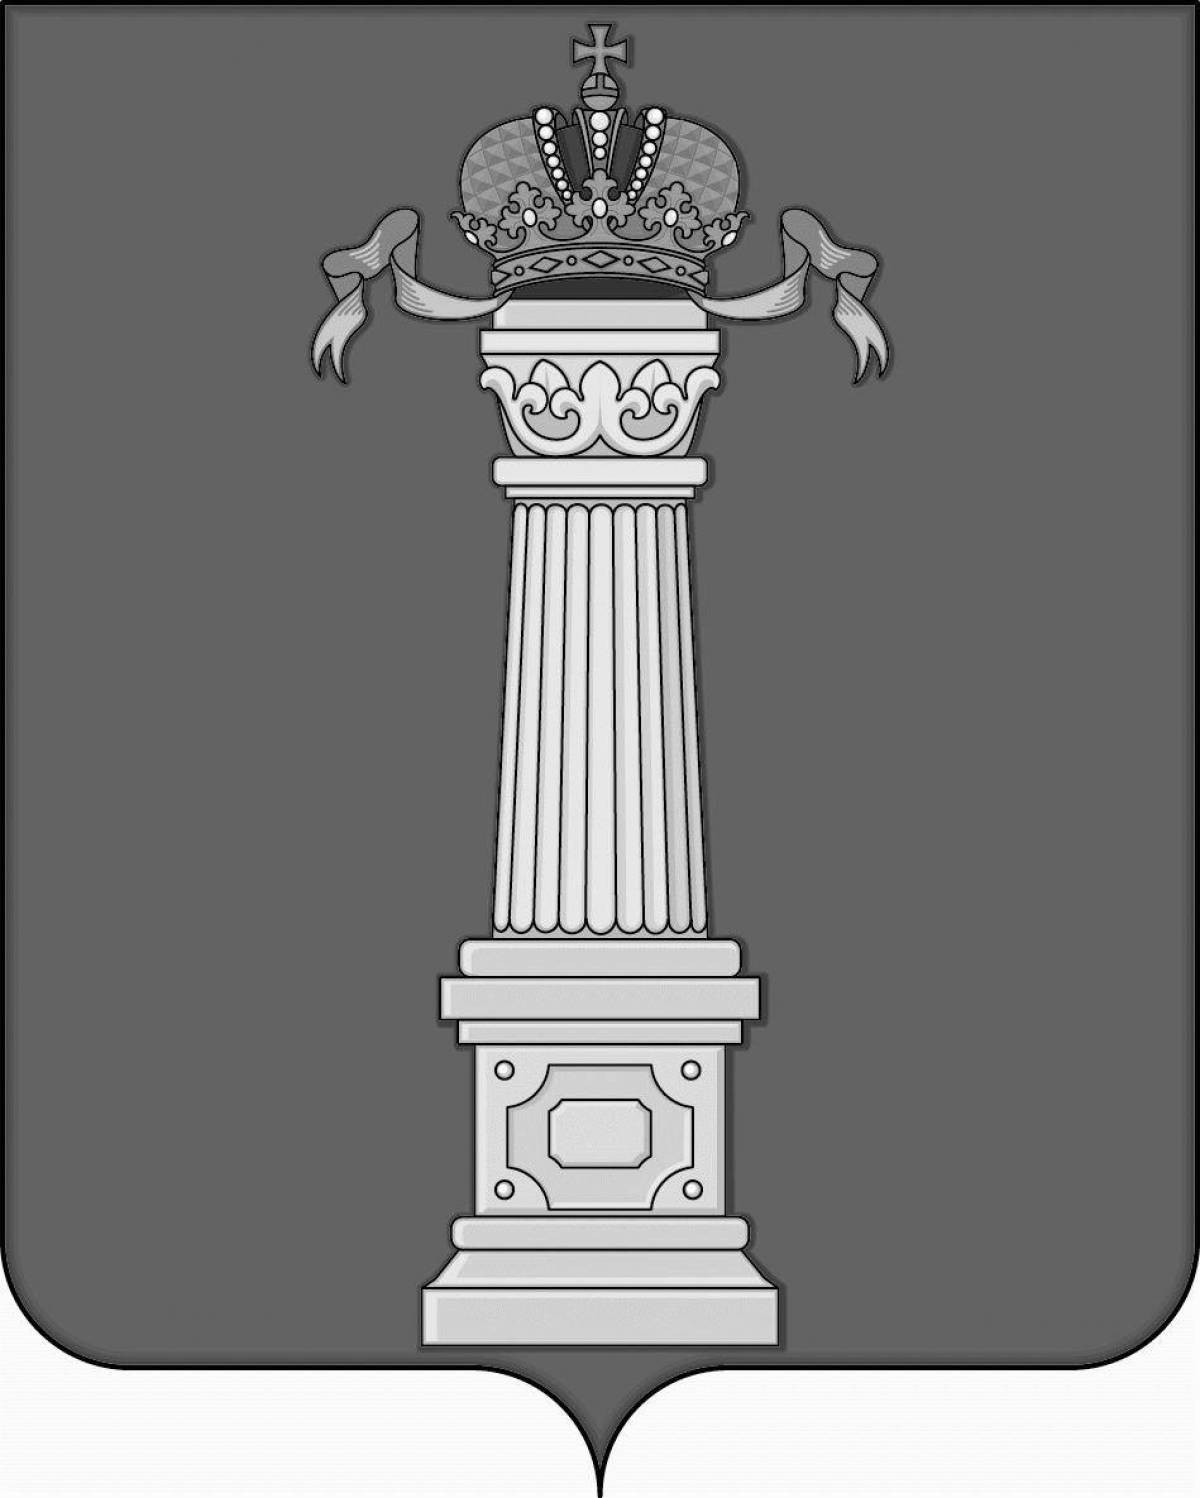 Coloring page luxurious coat of arms of the Ulyanovsk region